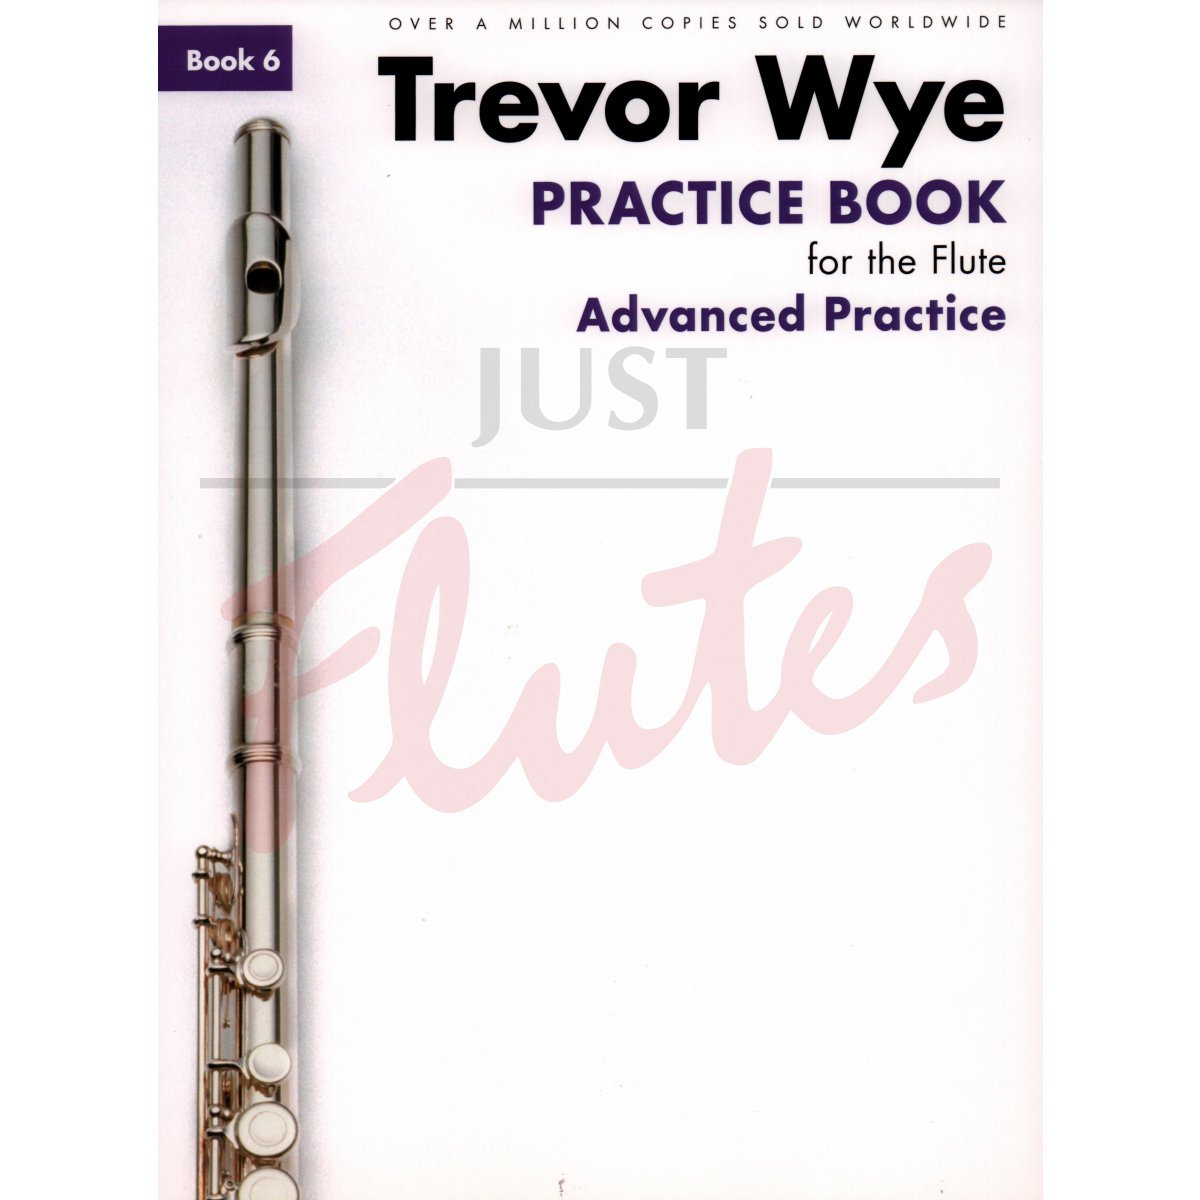 Practice Book for the Flute: Advanced Practice